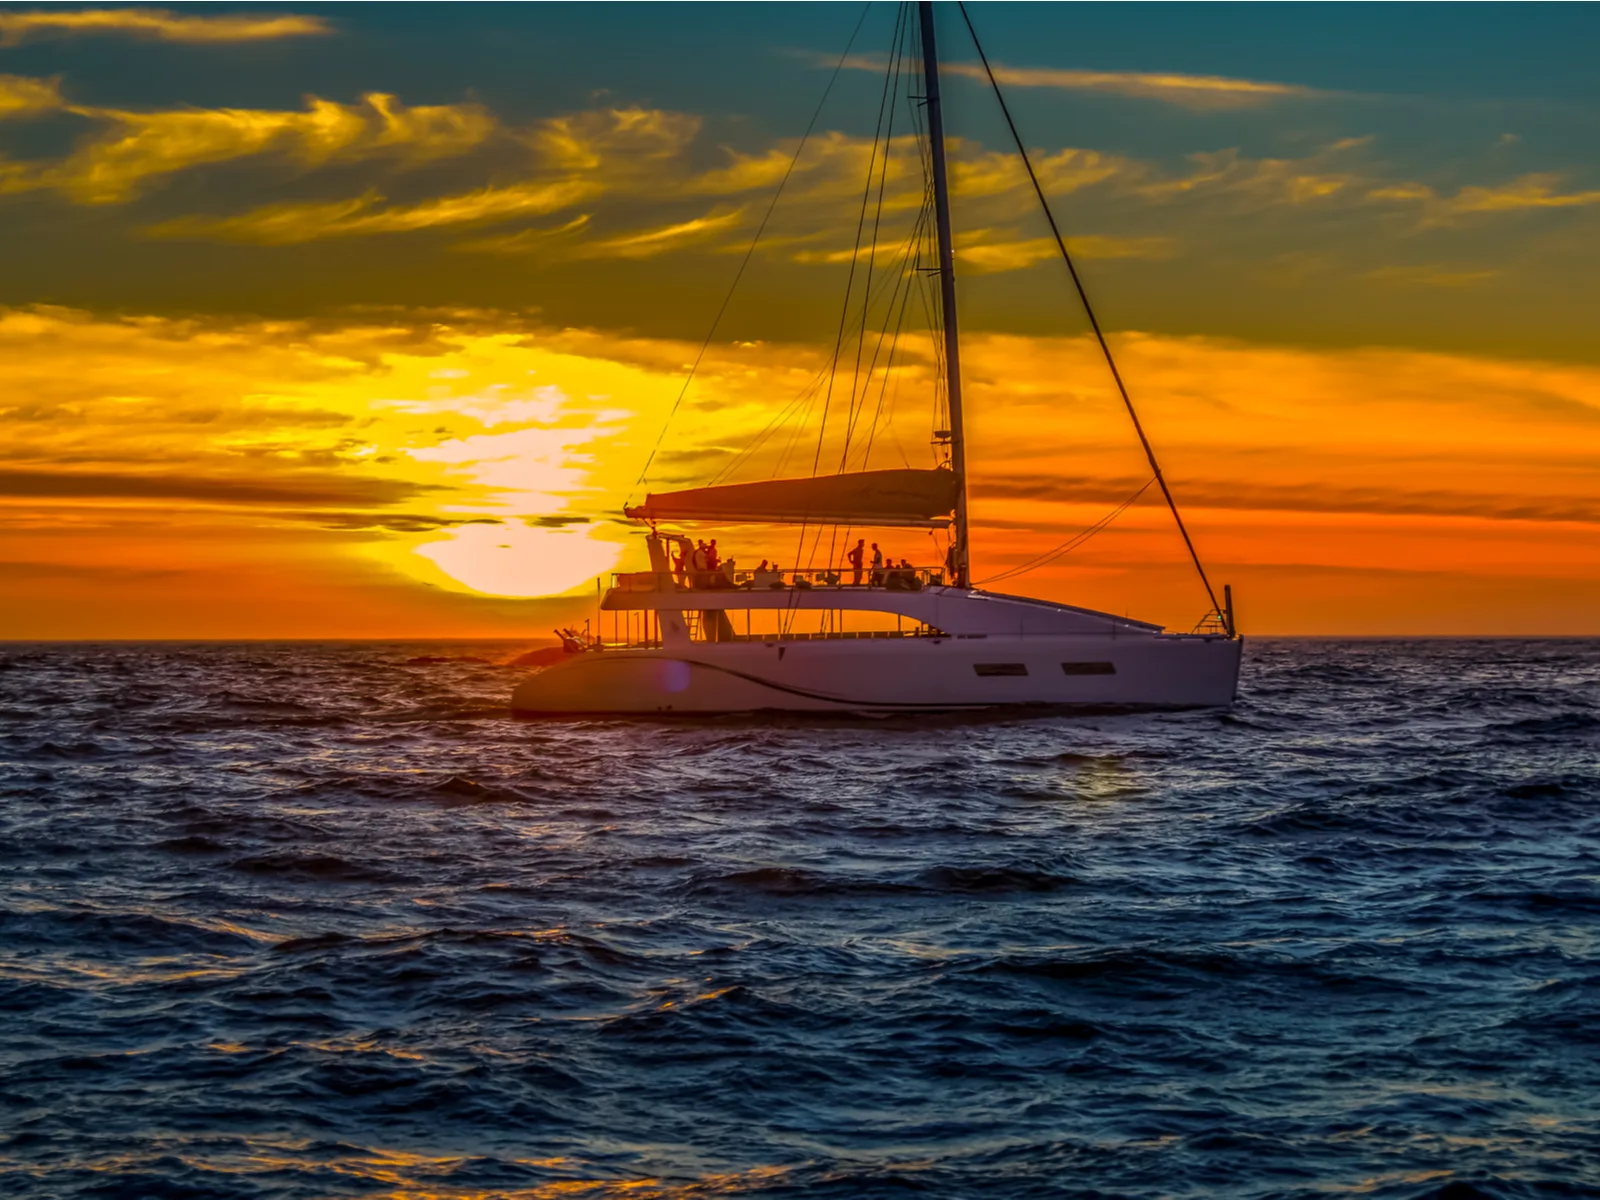 Several people onboard a yacht on a golden Sunset Cruise, one of the best things to do in Costa Rica